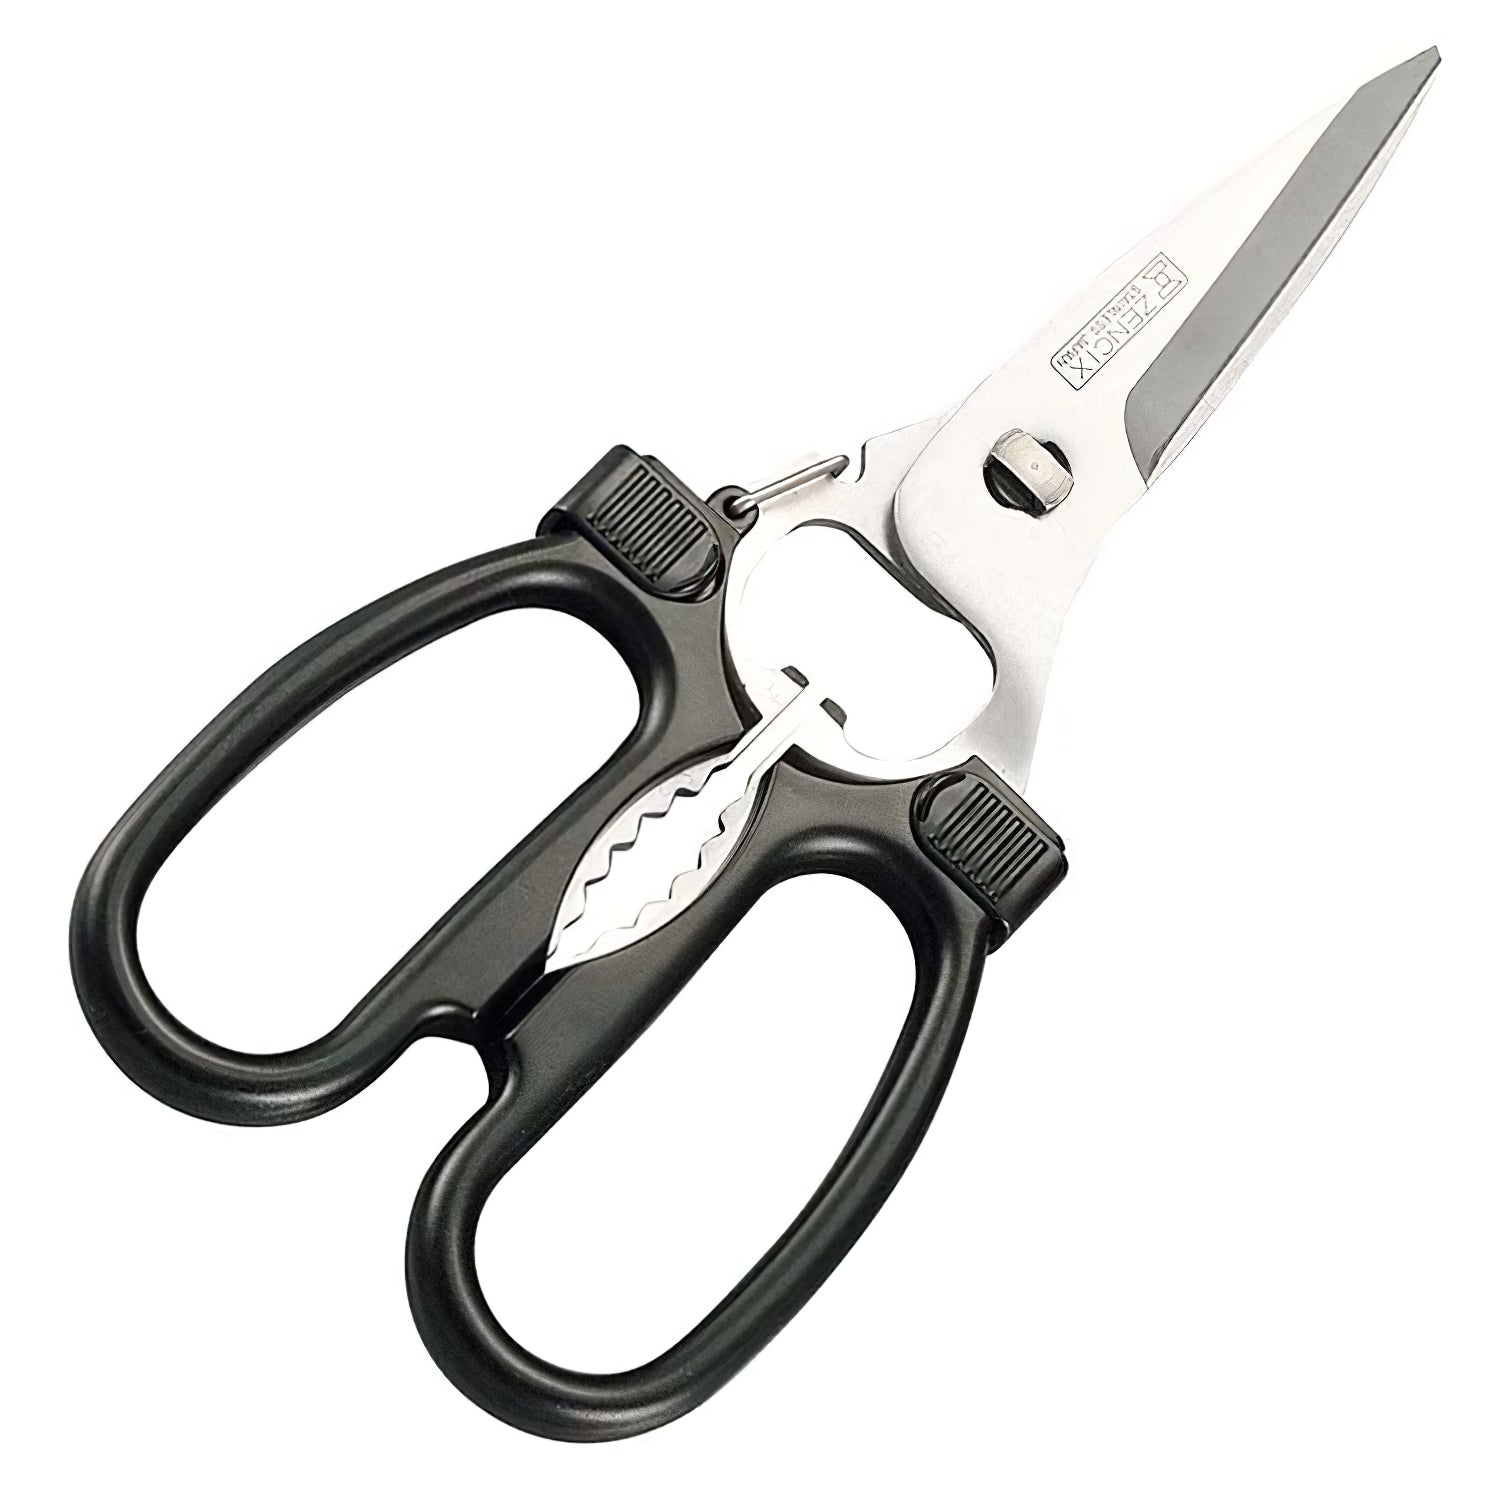 CANARY Japanese Kitchen Shears Dishwasher Safe Come Apart Blade,  Multipurpose Kitchen Scissors Heavy Duty, Made in JAPAN, Sharp Serrated  Japanese